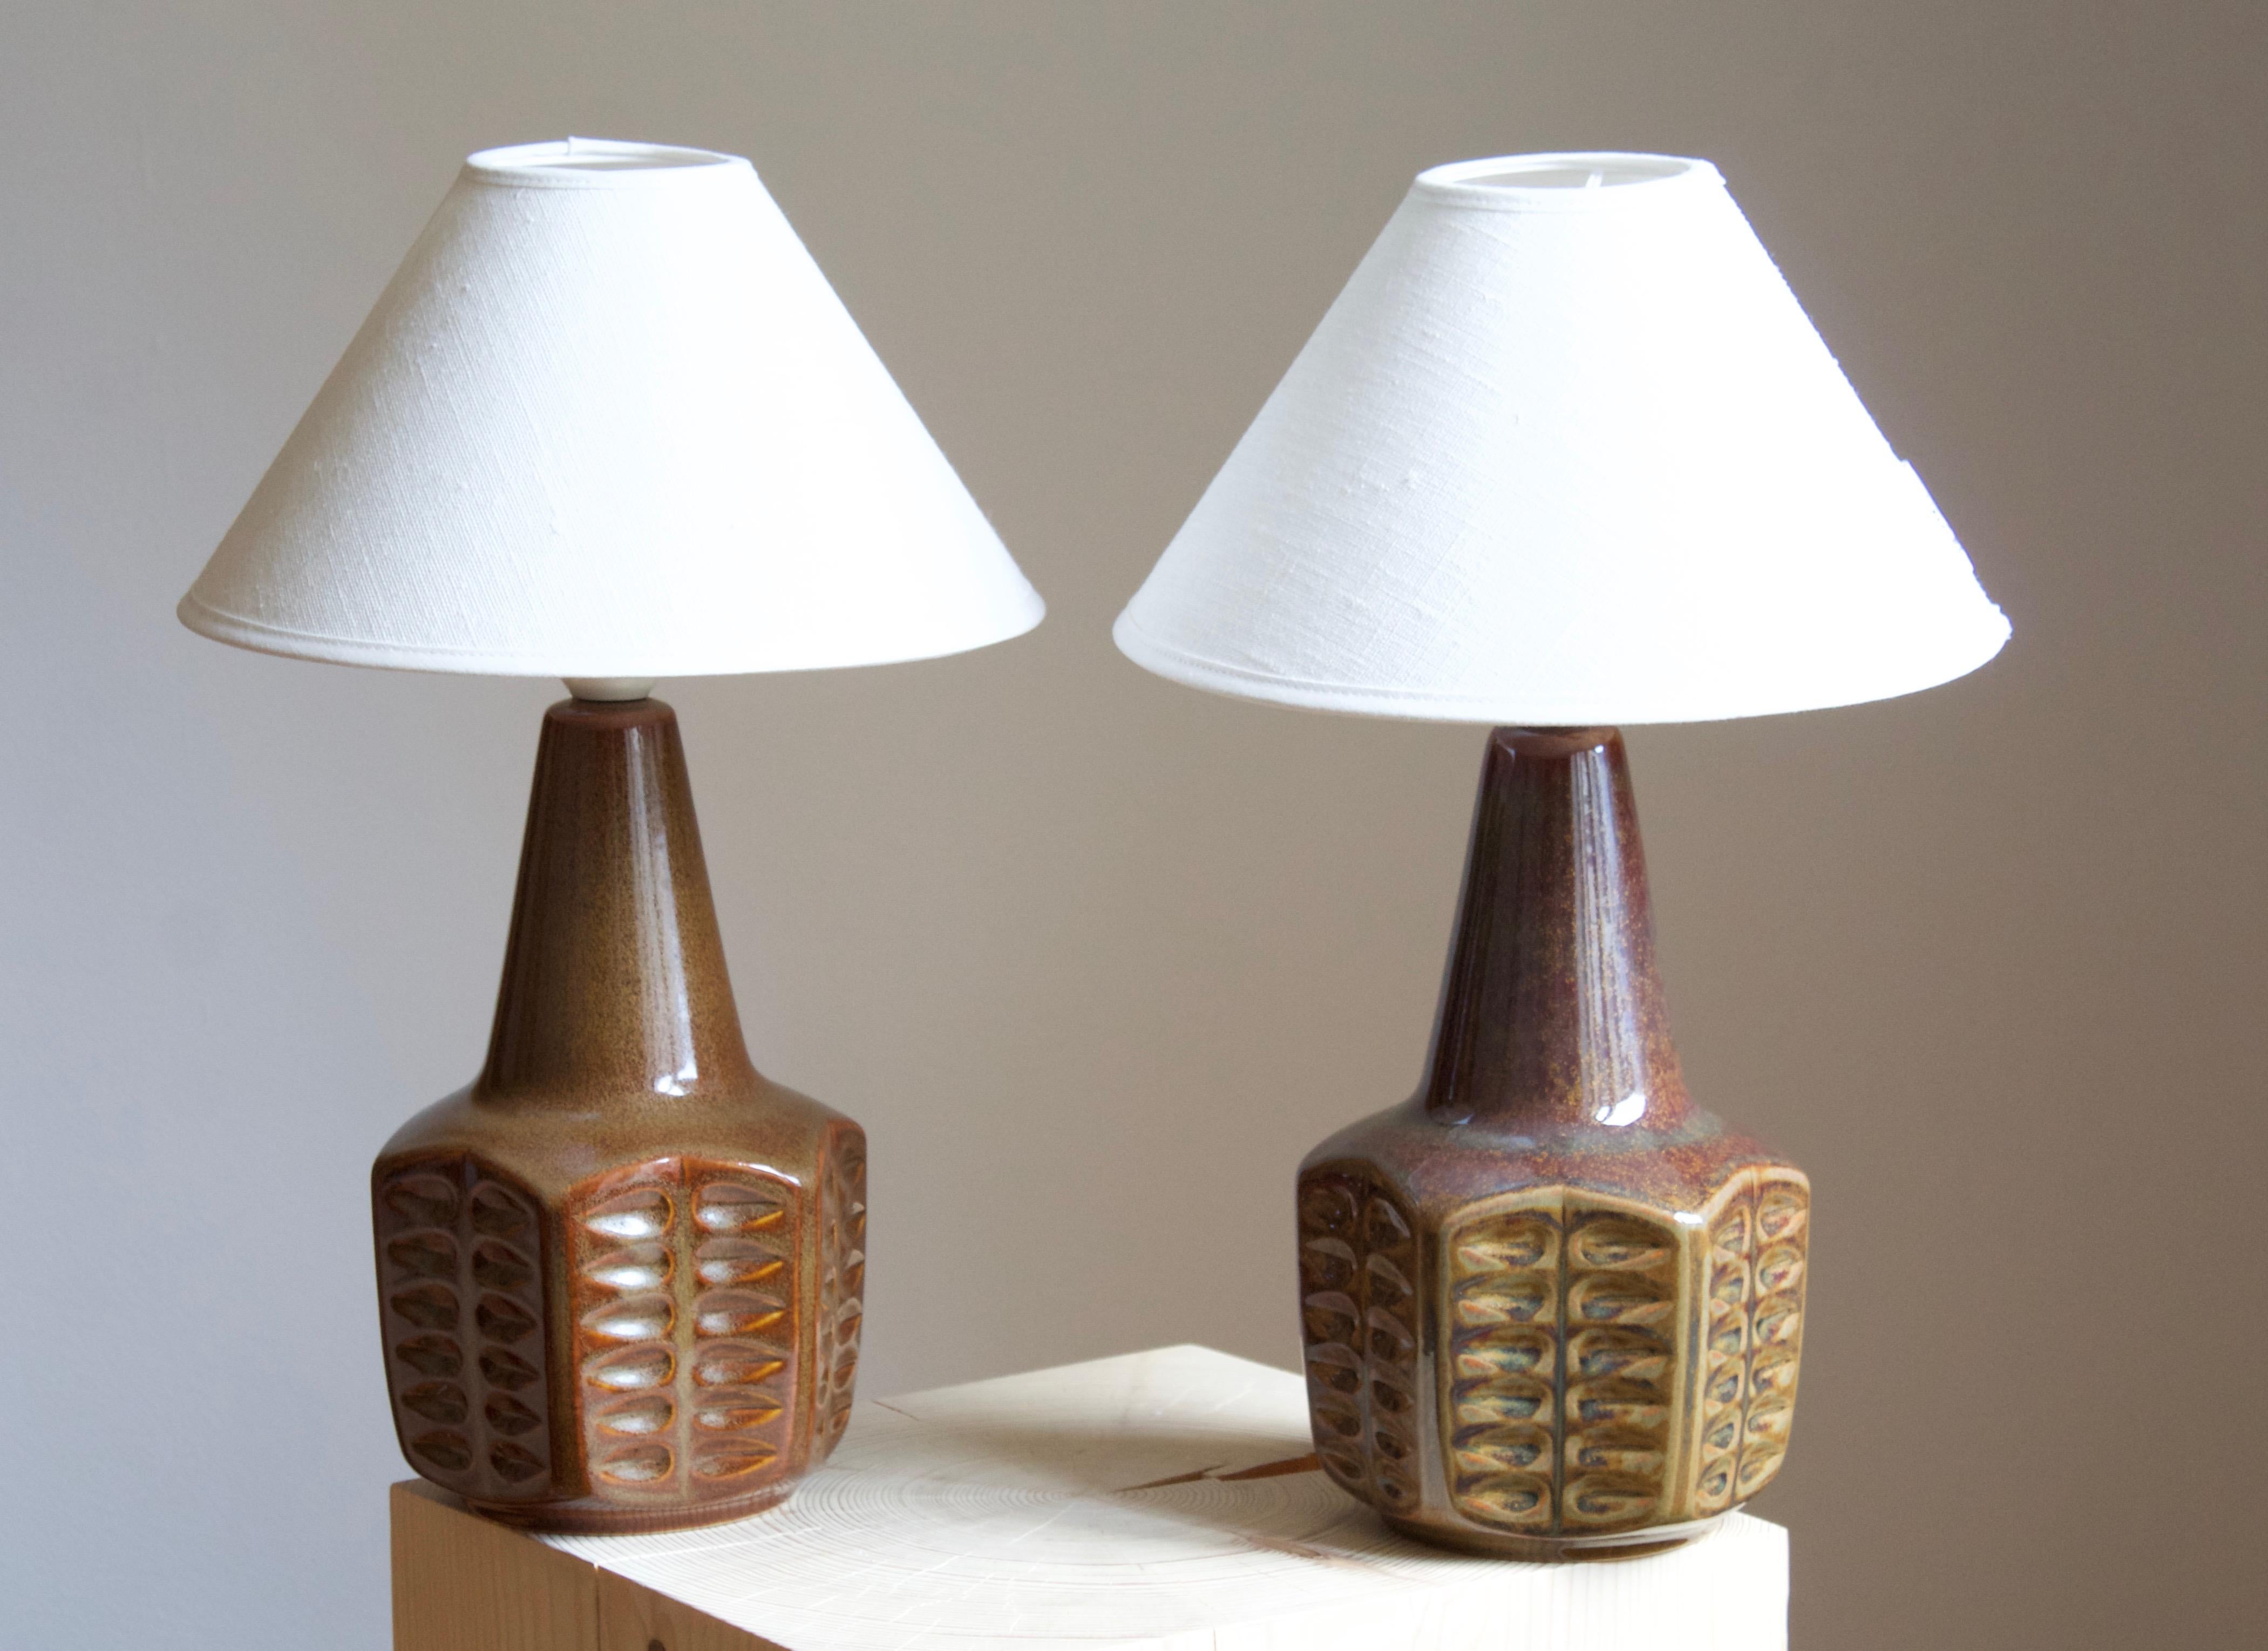 A pair of table lamps produced by Søholm Keramik, located on the island of Bornholm in Denmark. Features a highly artistic glazed and incised decor. 

Sold without lampshade. Stated dimensions exclude the lampshade.

Glaze features green-brown